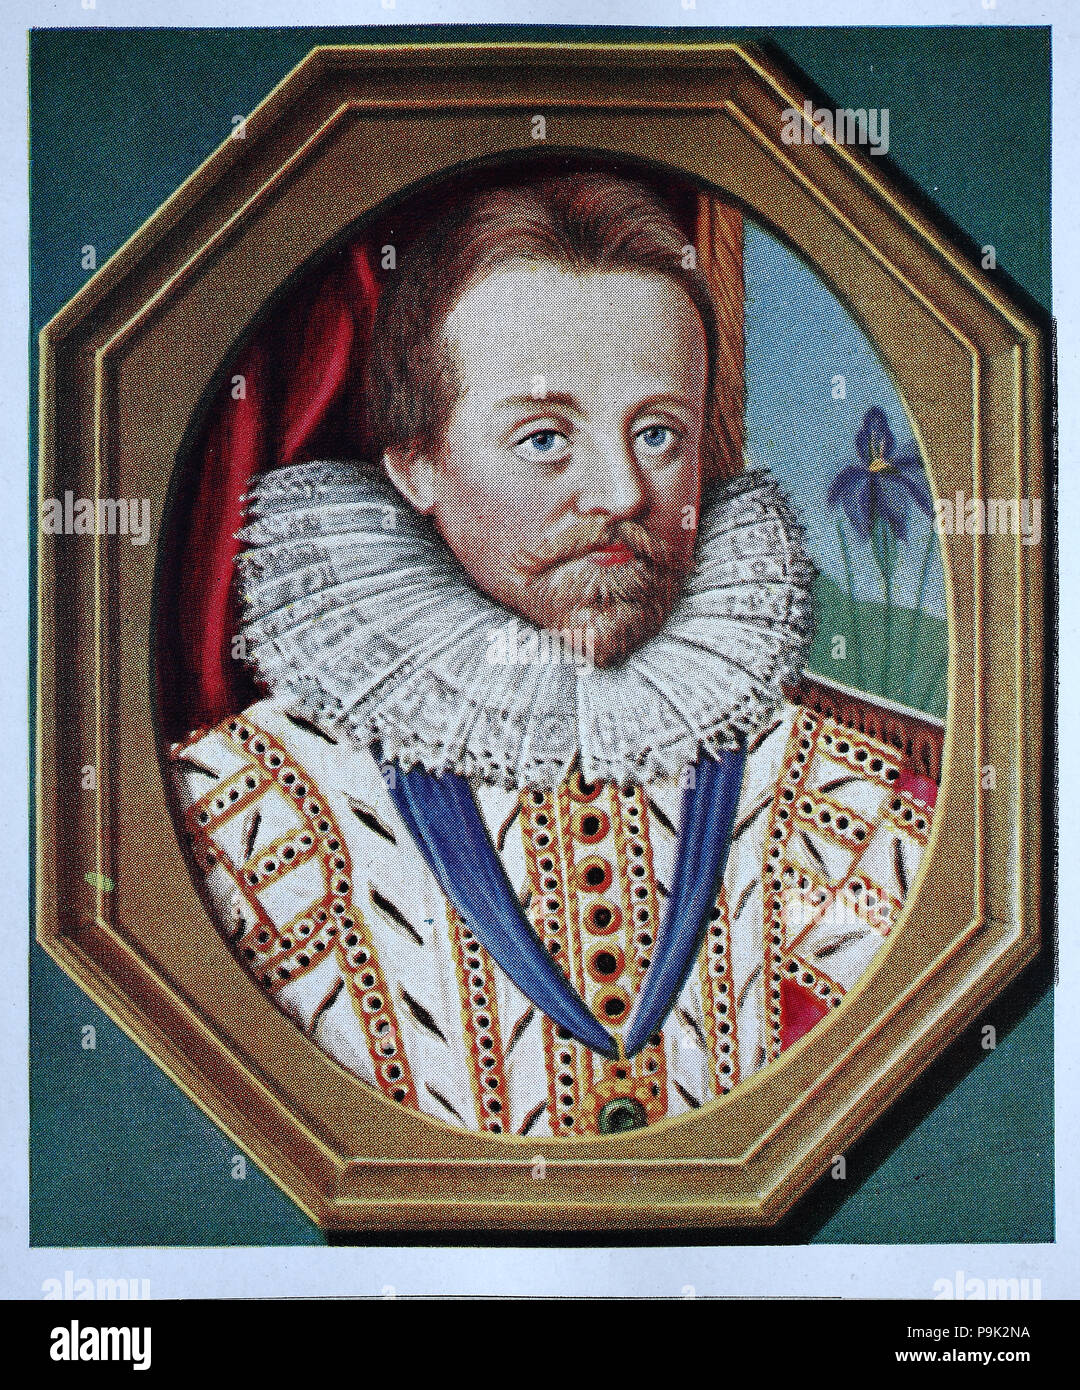 James VI and I, James Charles Stuart, 19 June 1566 â€“ 27 March 1625, was King of Scotland as James VI from 24 July 1567 and King of England and Ireland as James I from the union of the Scottish and English crowns on 24 March 1603 until his death in 1625, digital improved reproduction of an original print from the year 1900 Stock Photo